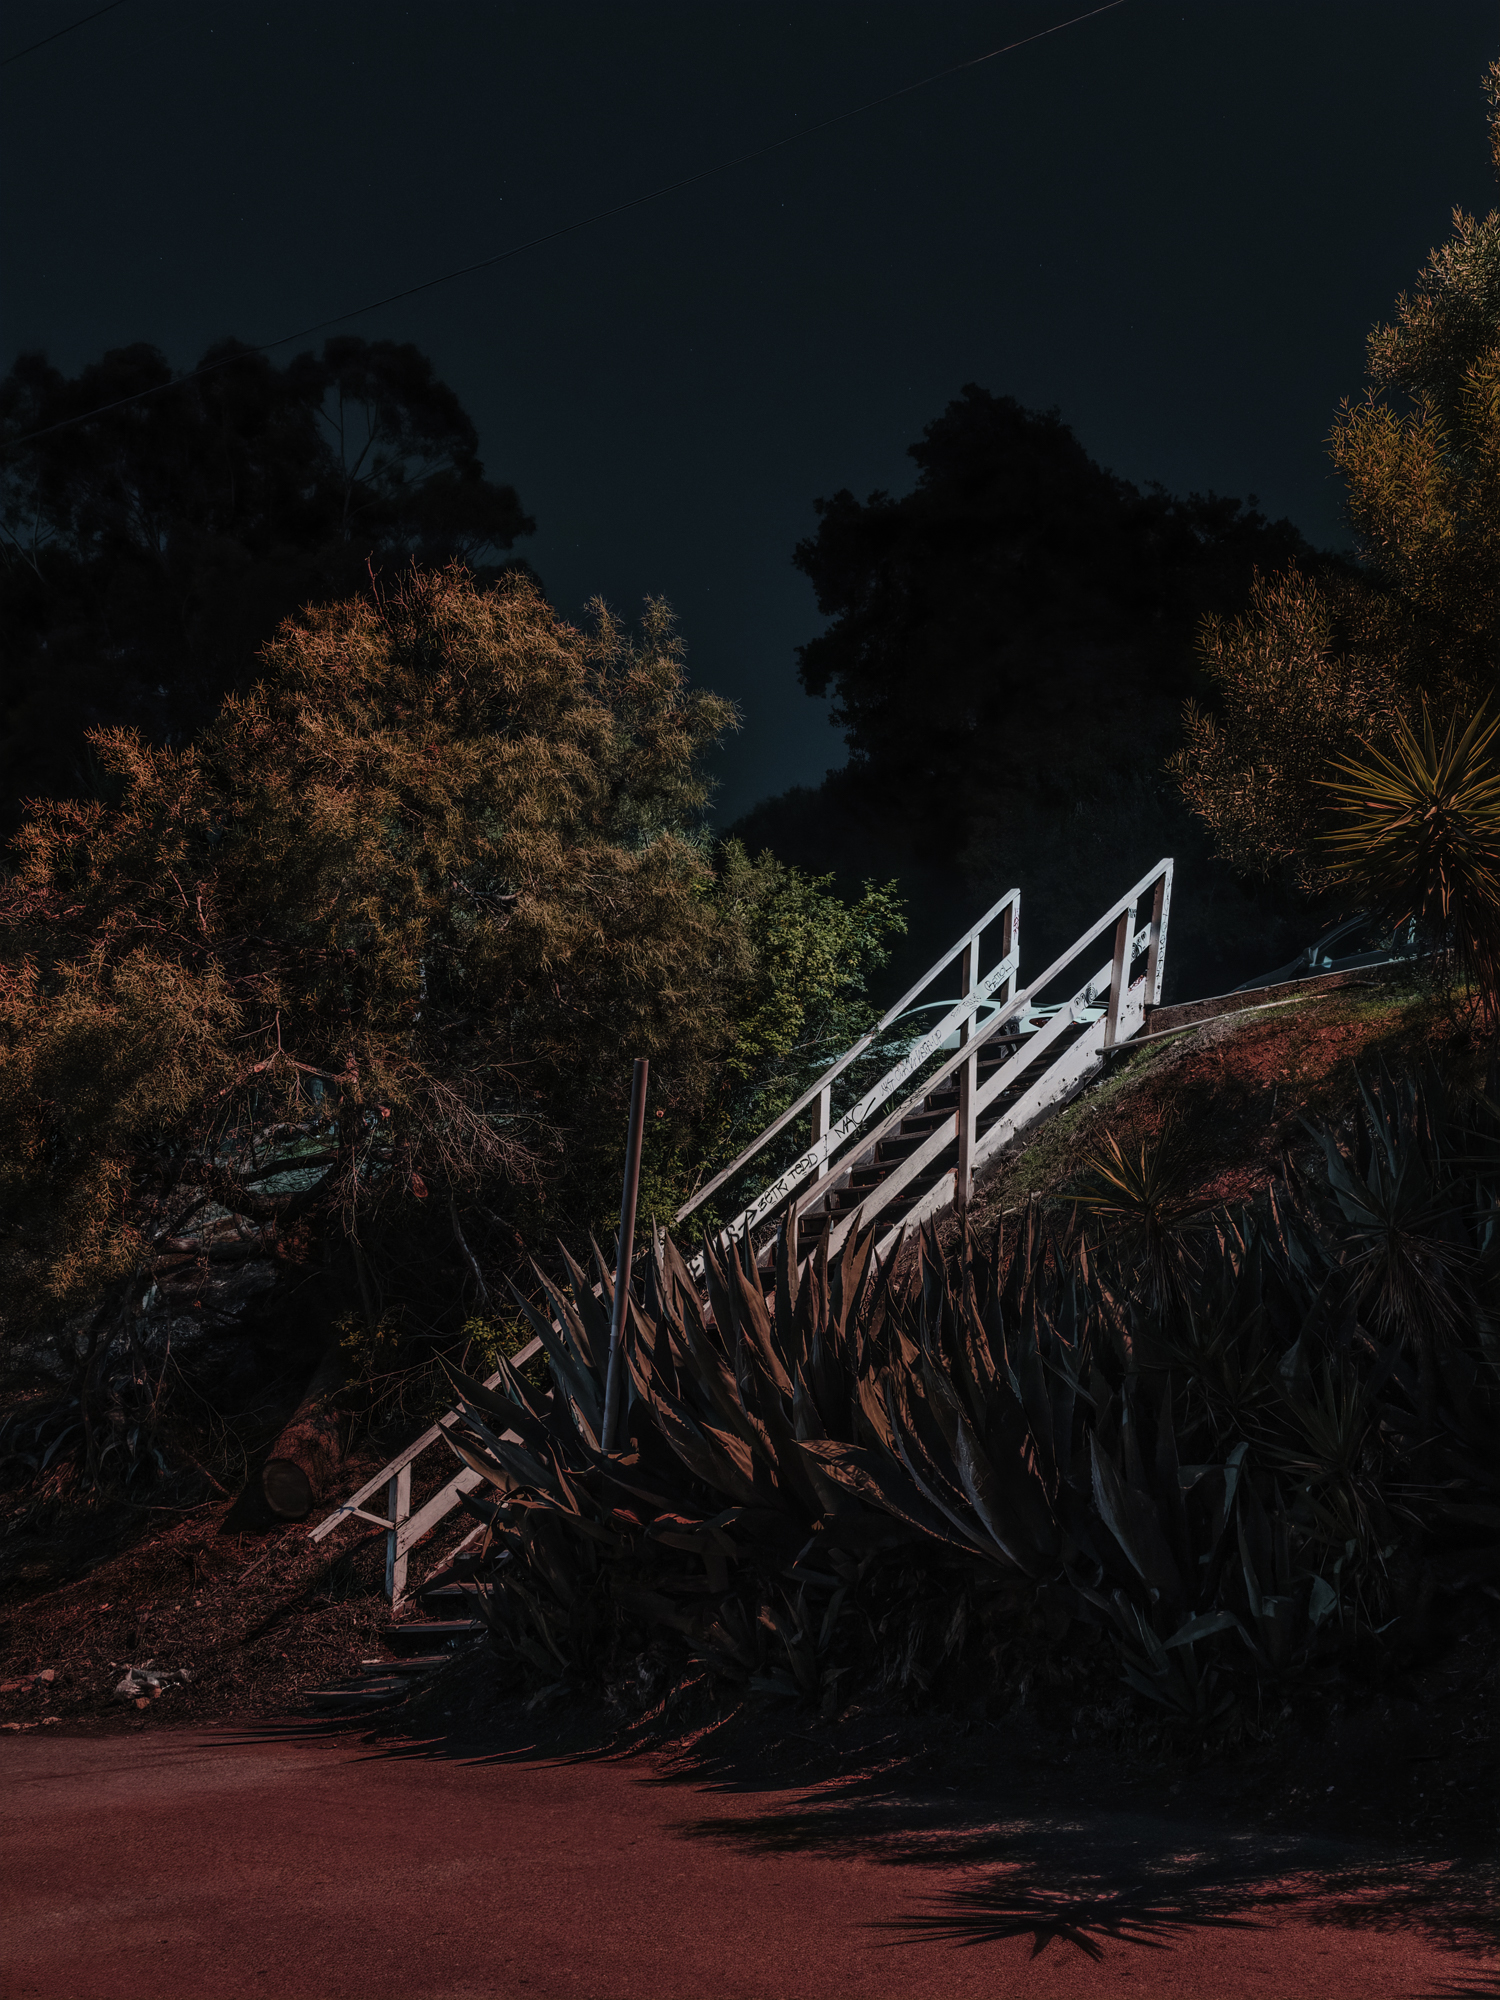    Staircase on Lilac, Los Angeles, 2018  . Archival Pigment Print.  30” x 40” - Limited Edition of 2 | 24” x 32” - Limited Edition of 3 | 18” x 24” - Limited Edition of 5  Pricing &amp; Purchase Info:  Leon Gallery  